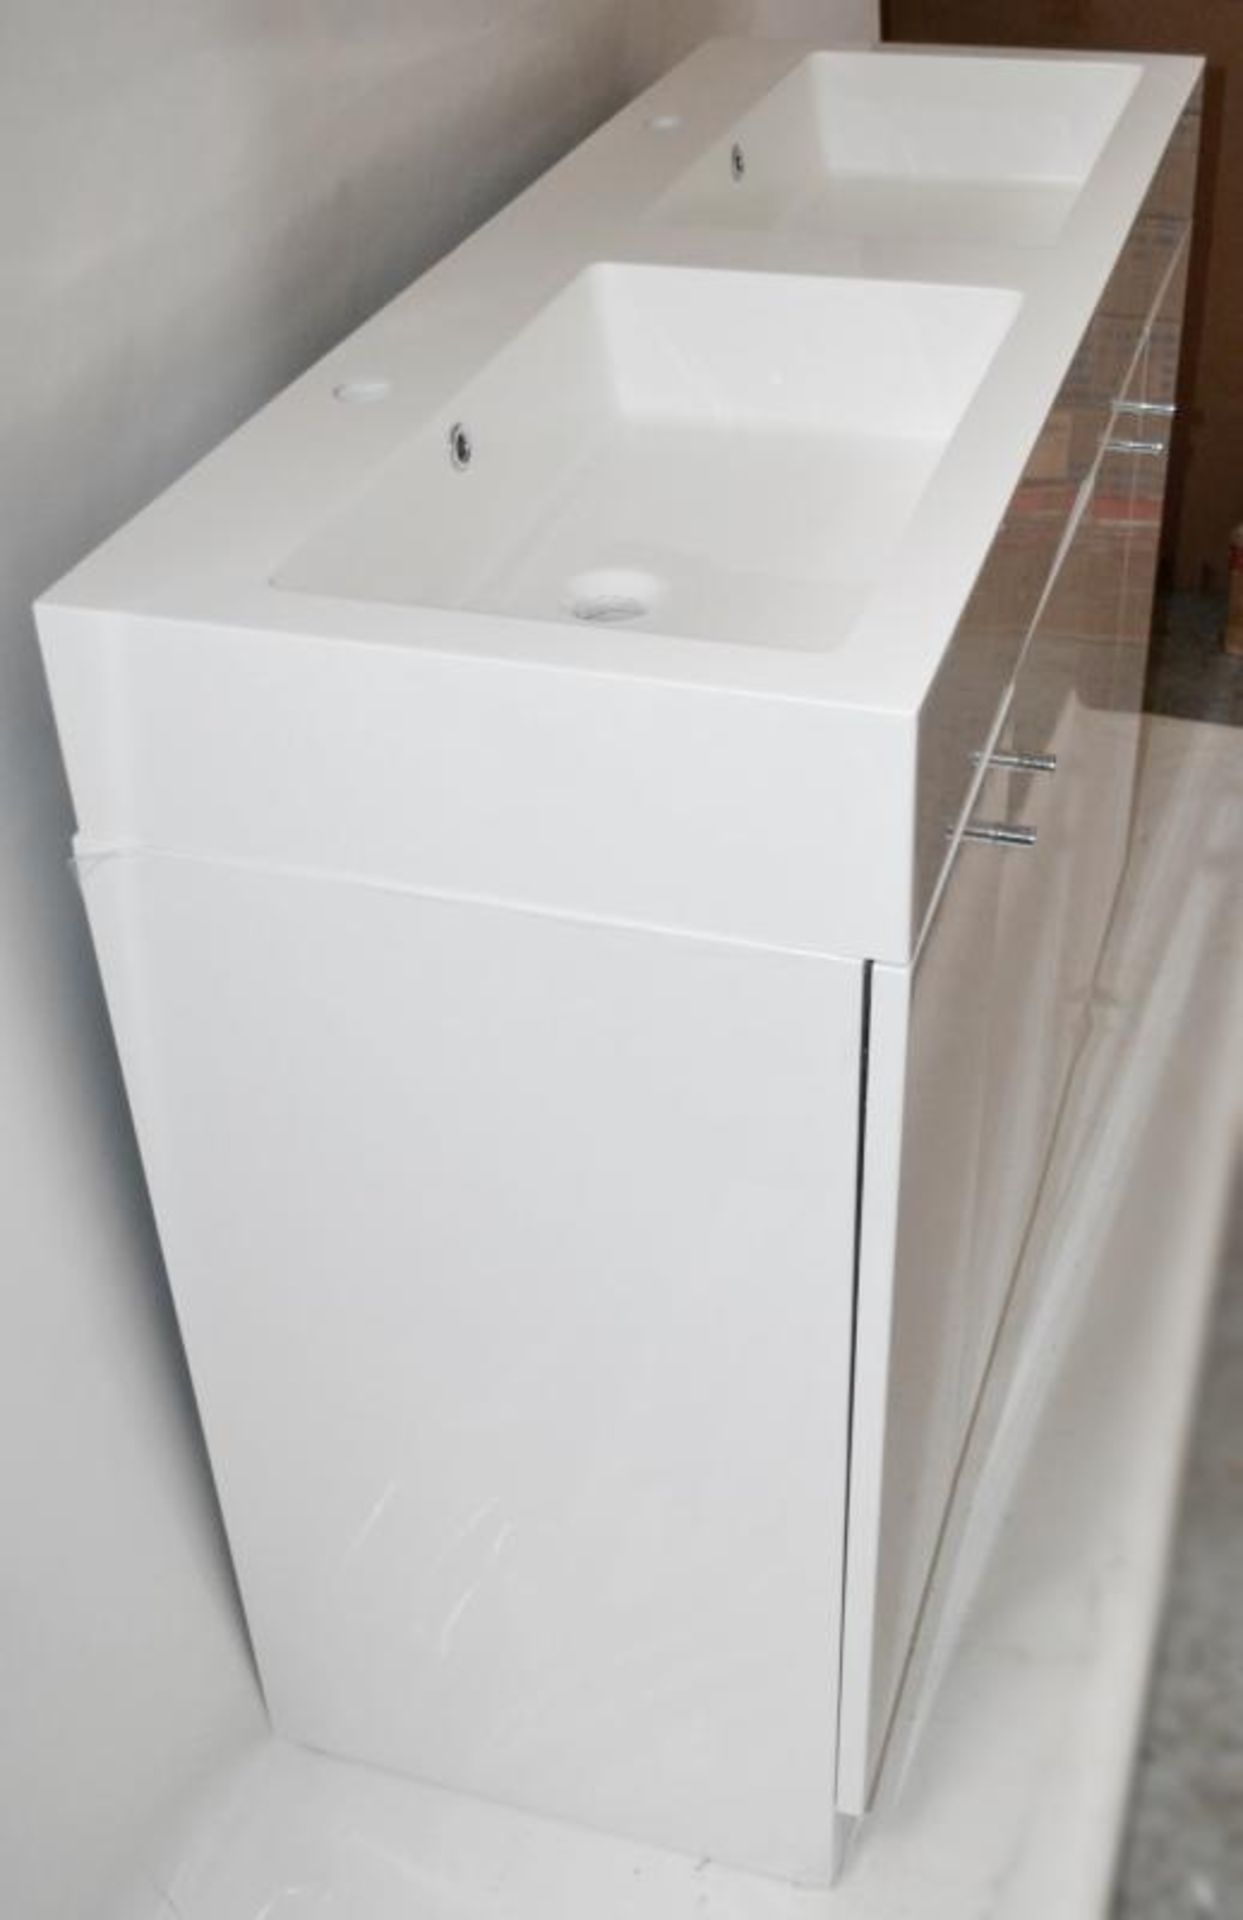 JOB LOT of 10 x Gloss White 1200mm 4-Door Double Basin Freestanding Bathroom Cabinet - New & Boxed - Image 6 of 7